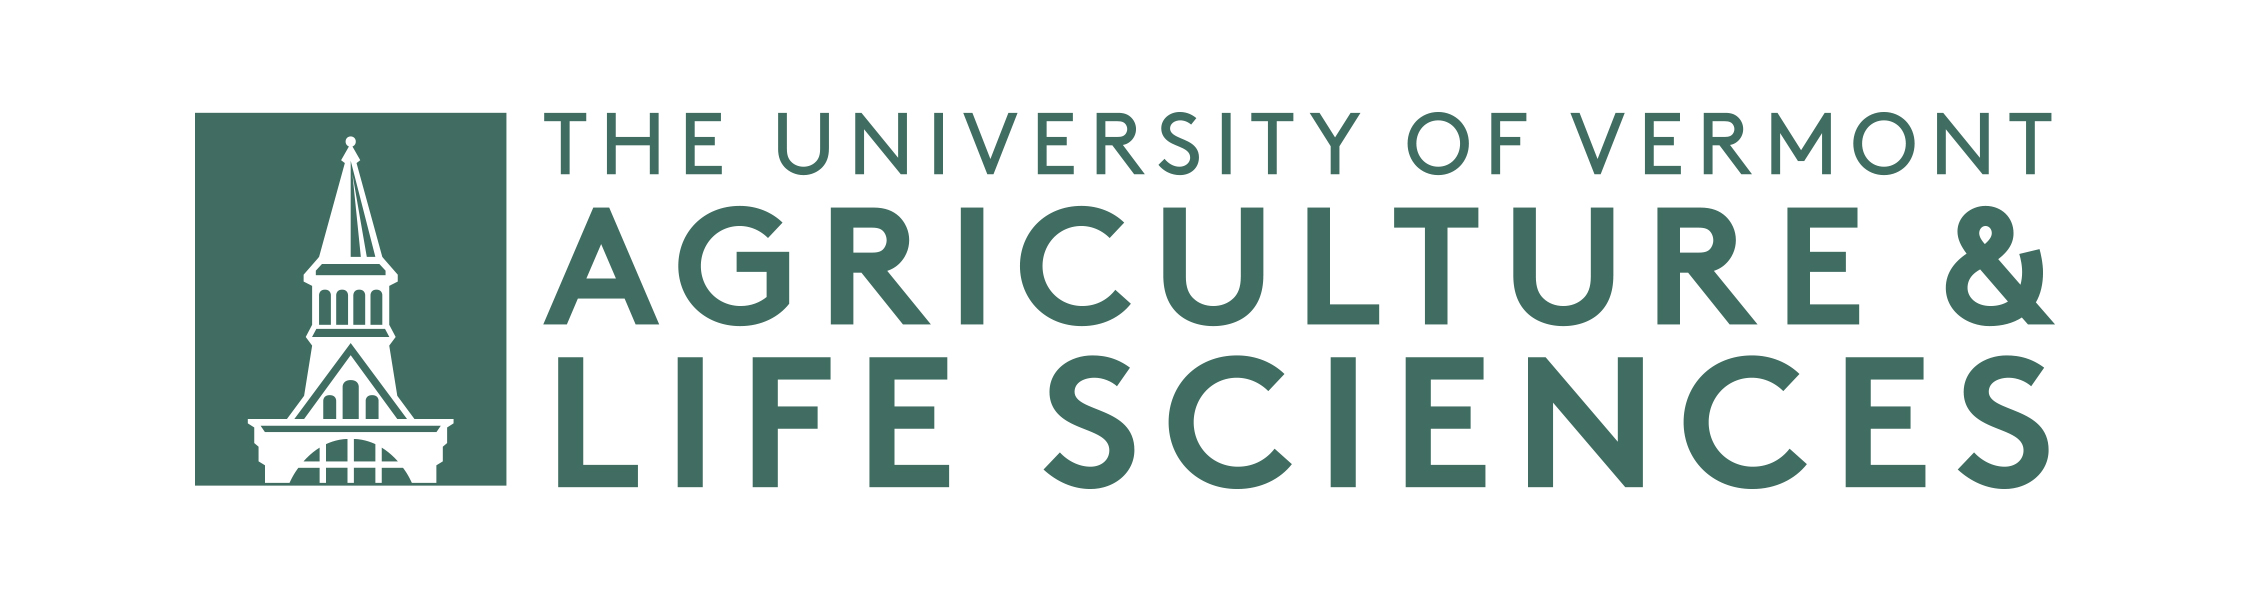 The University of Vermont Agriculture and Life Sciences logo